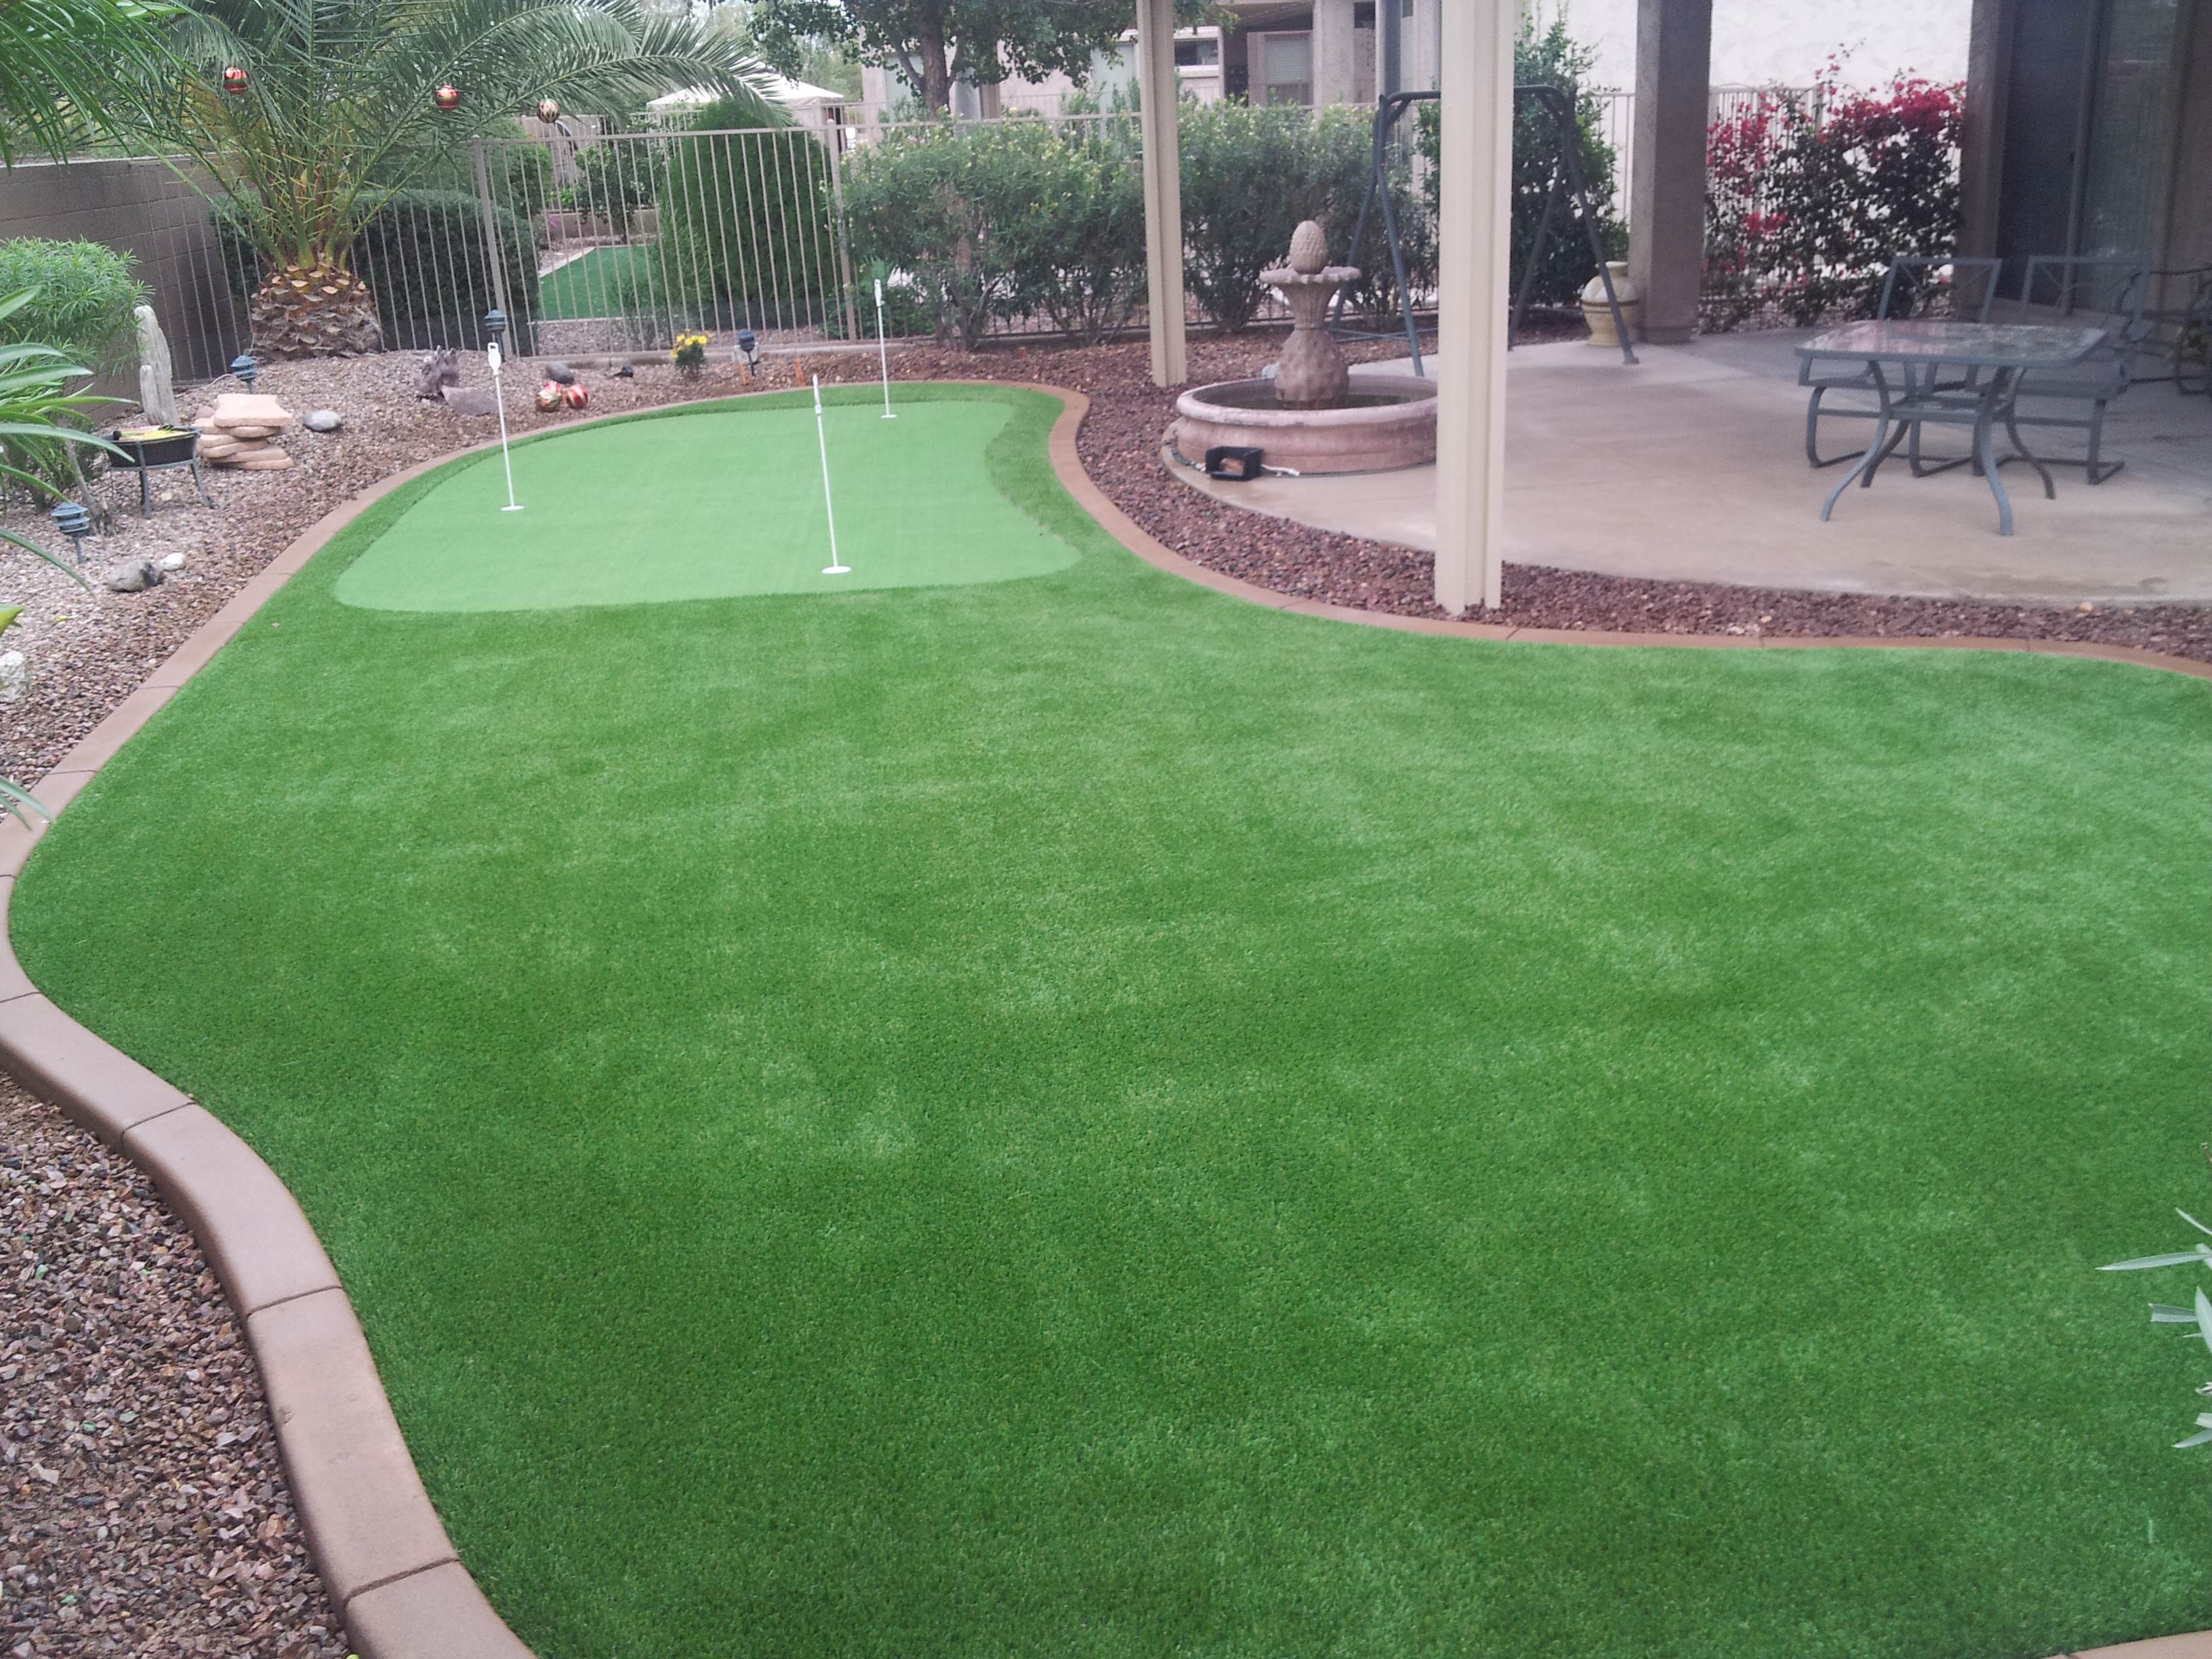 Contact Luxury Turf for a Free Backyard Putting Green Installation Consultation